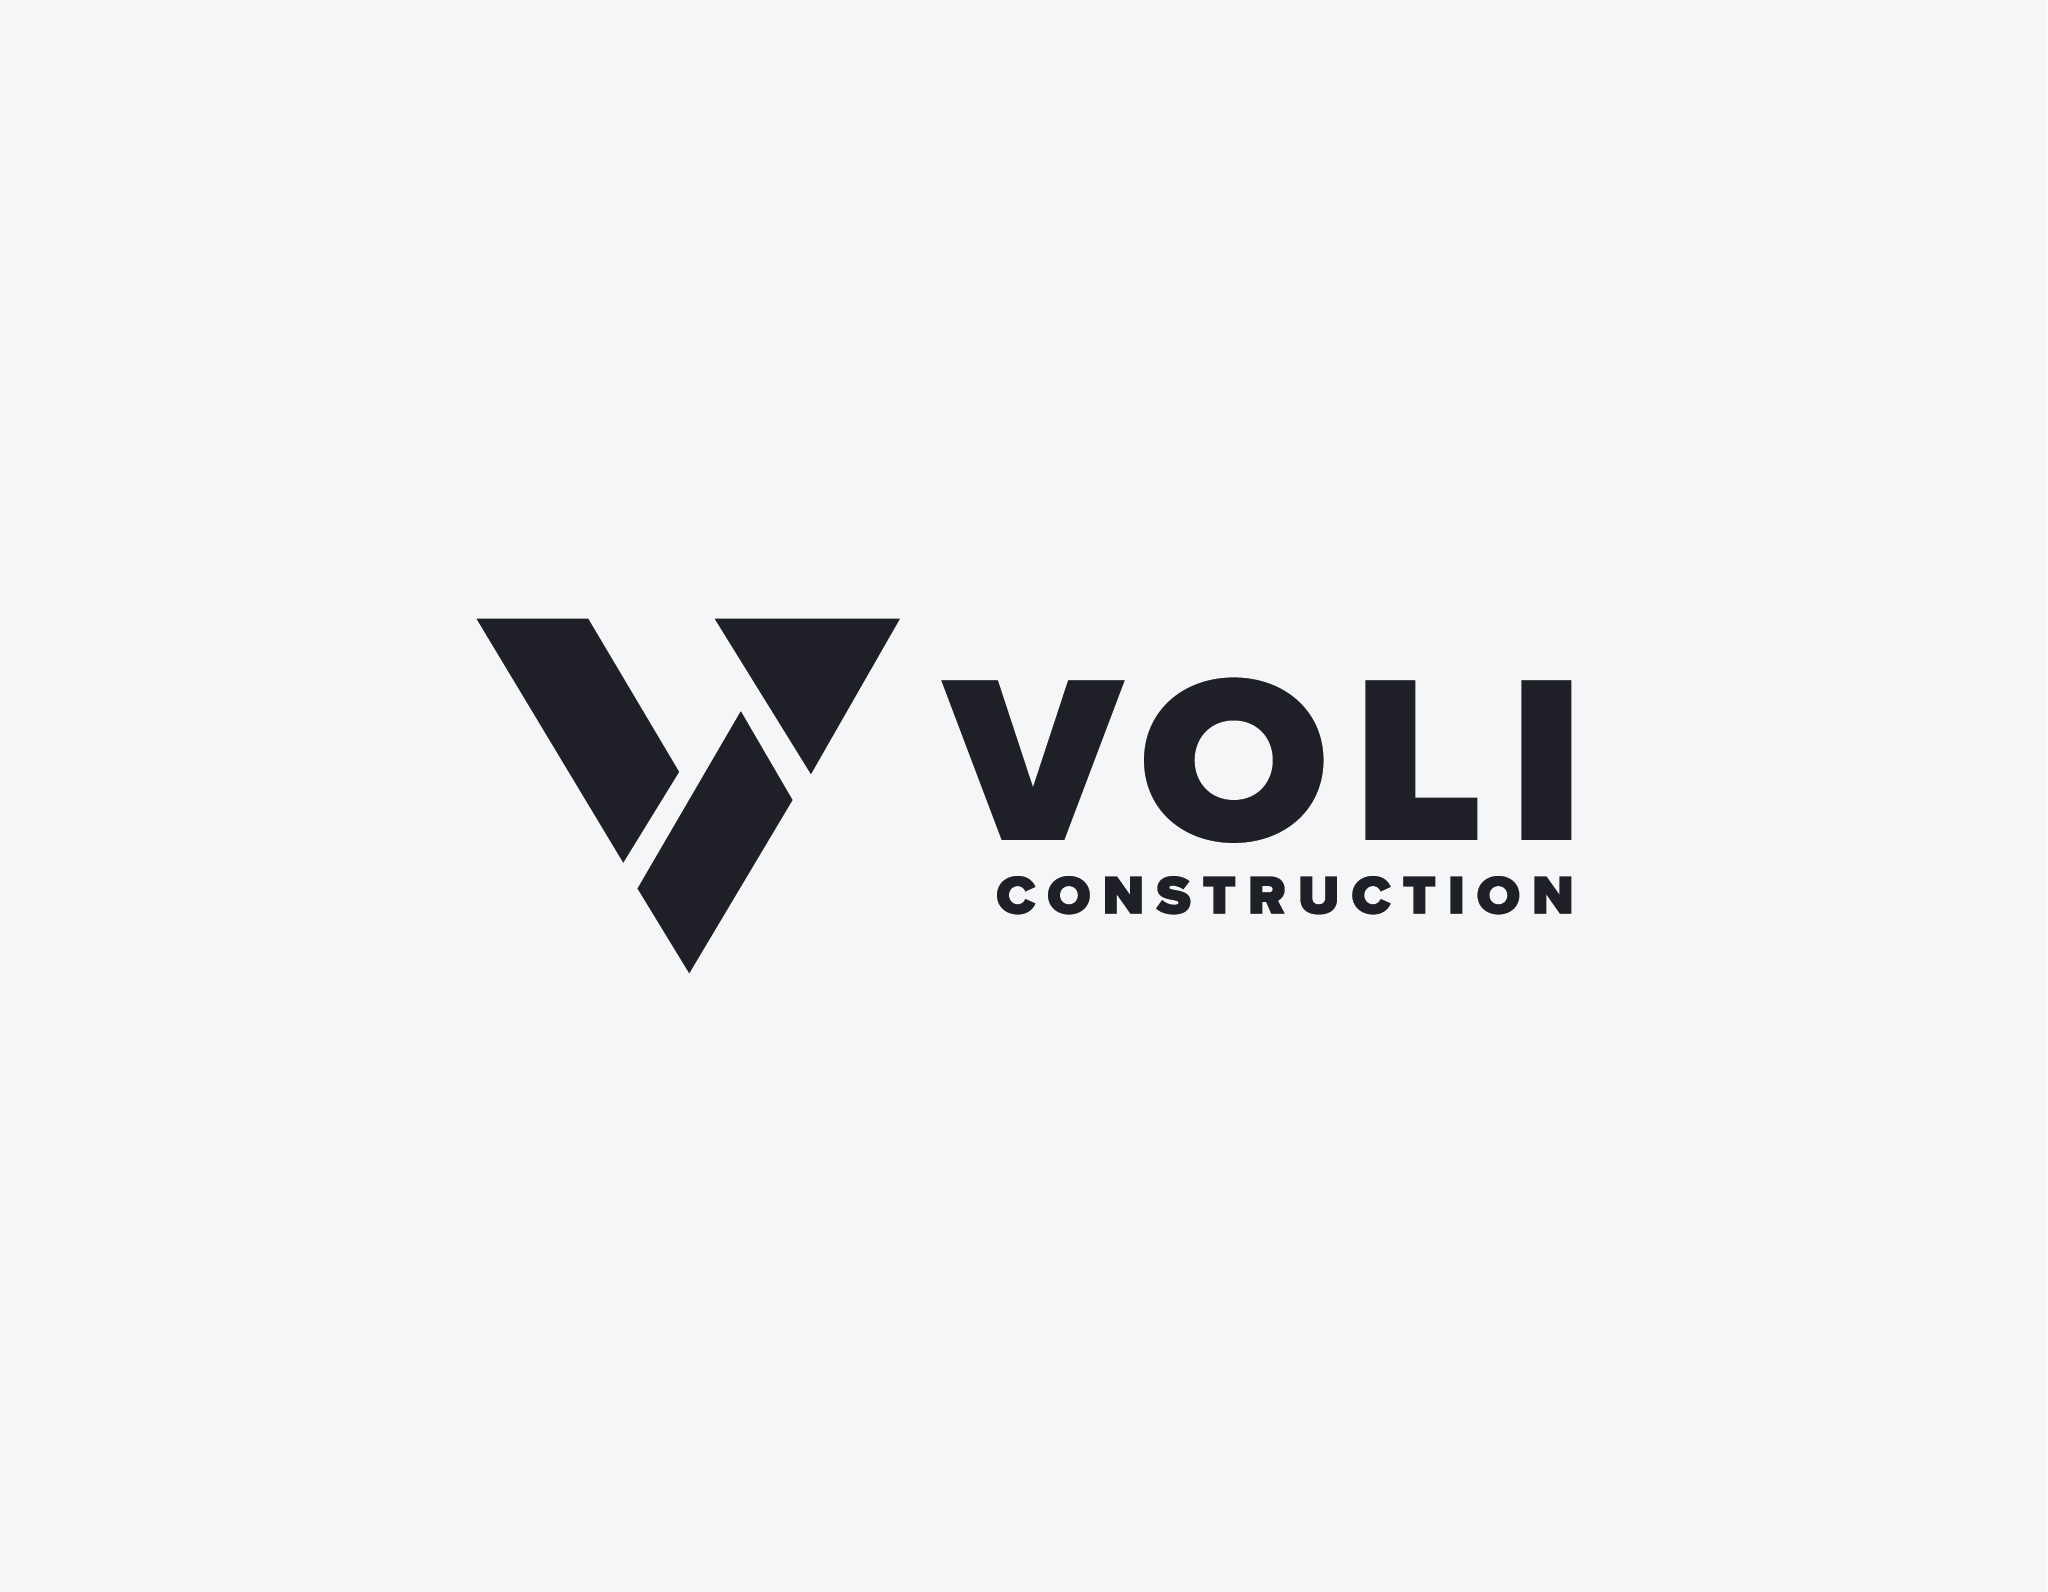 Voli Construction, a leading civil engineering and construction company based in East London, Eastern Cape, partnered with The Logo Expert to refresh their brand identity. The resulting logo design embodies the strength and durability that Voli Construction is known for in the structures they build.